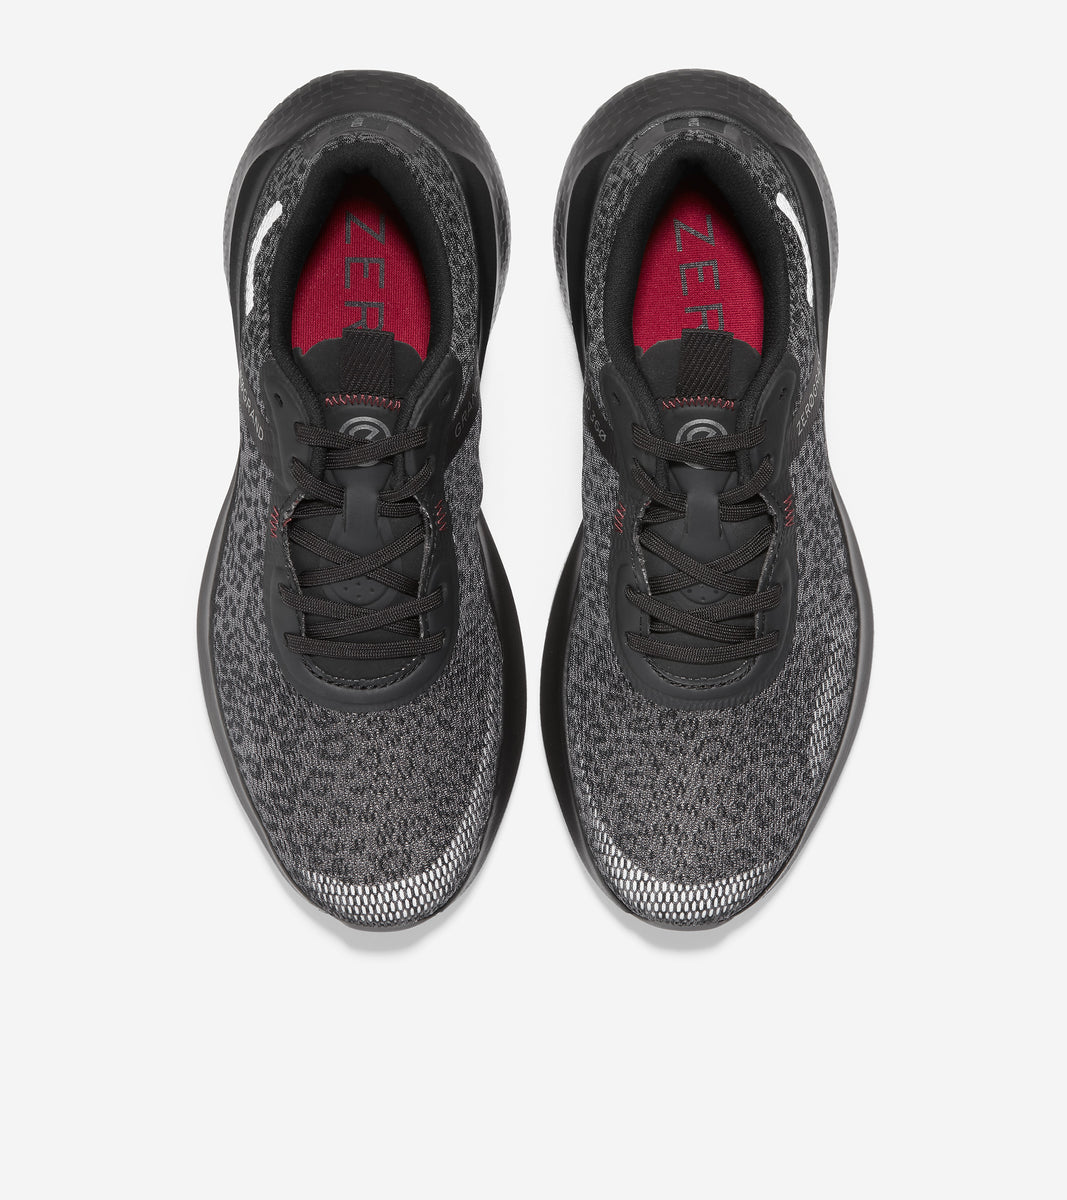 W22897-ZERØGRAND Outpace 2 Running Shoe-Black/Reflective Silver/Rio Red